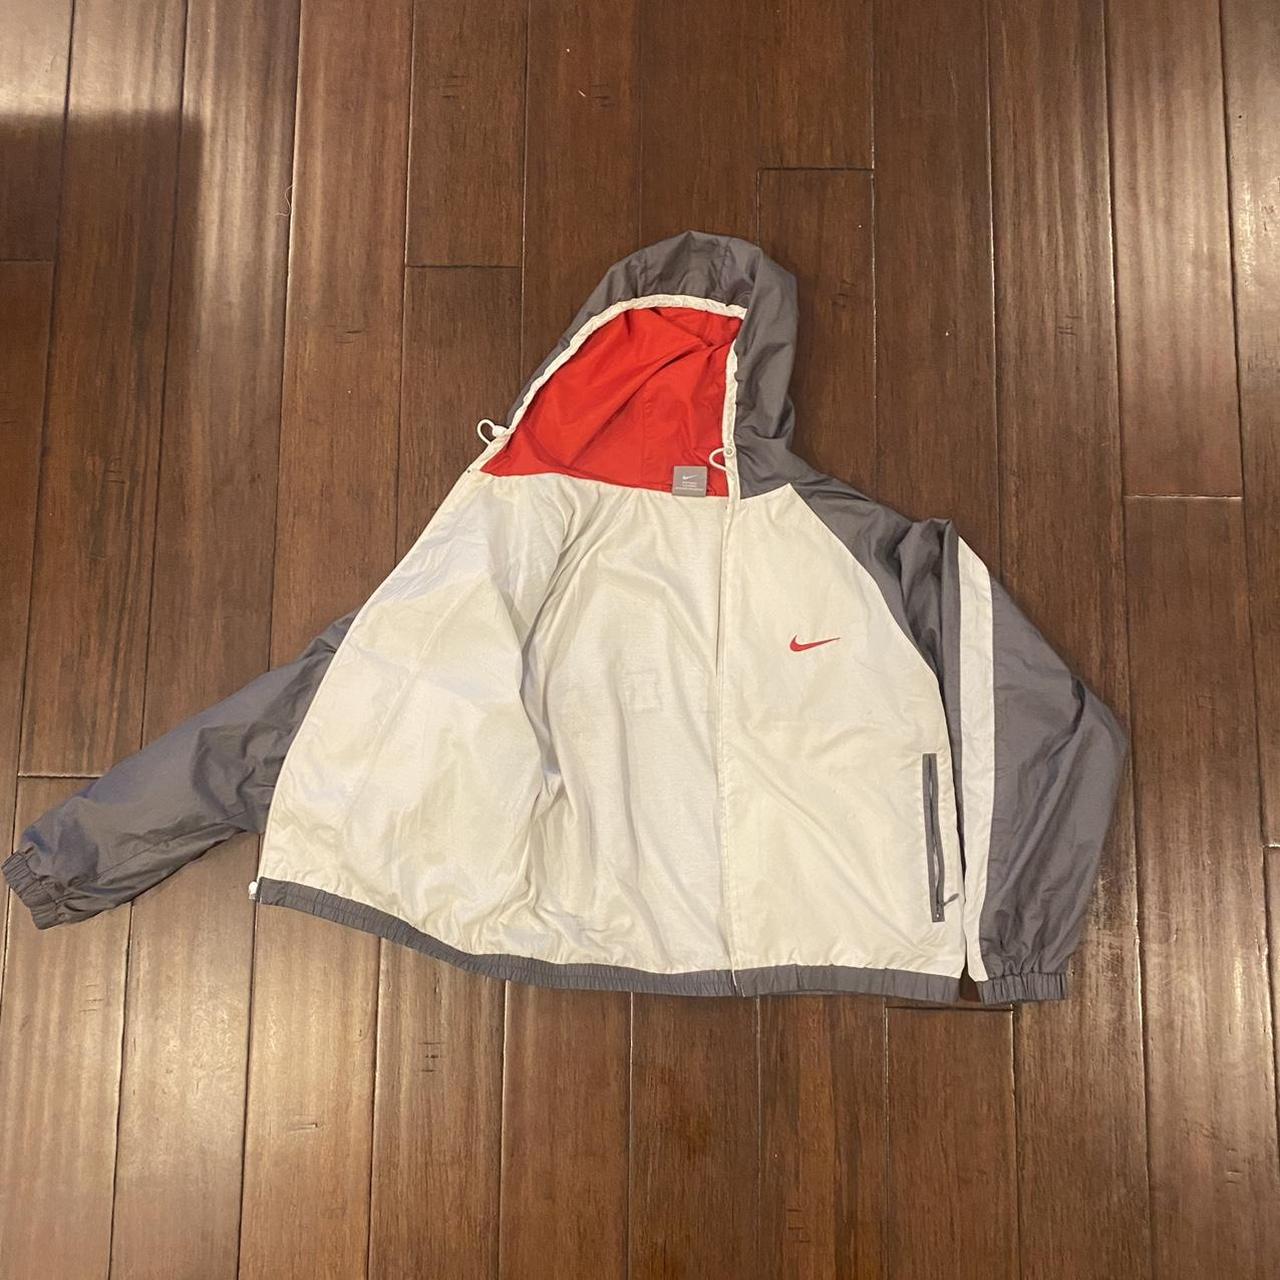 Nike Women's White and Red Jacket (4)